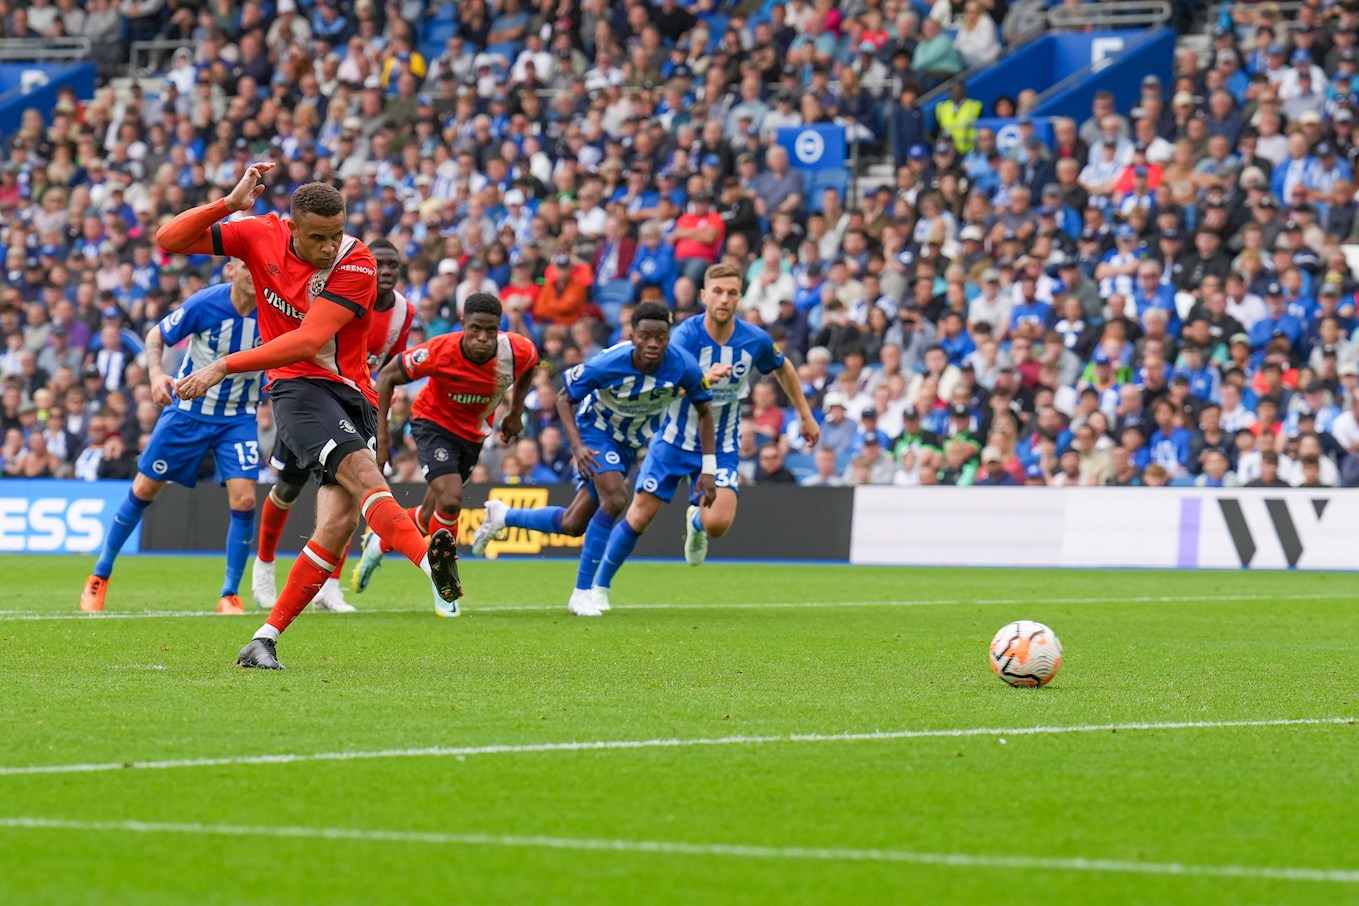 Carlton Morris scoring our first Premier League goal from the penalty spot.